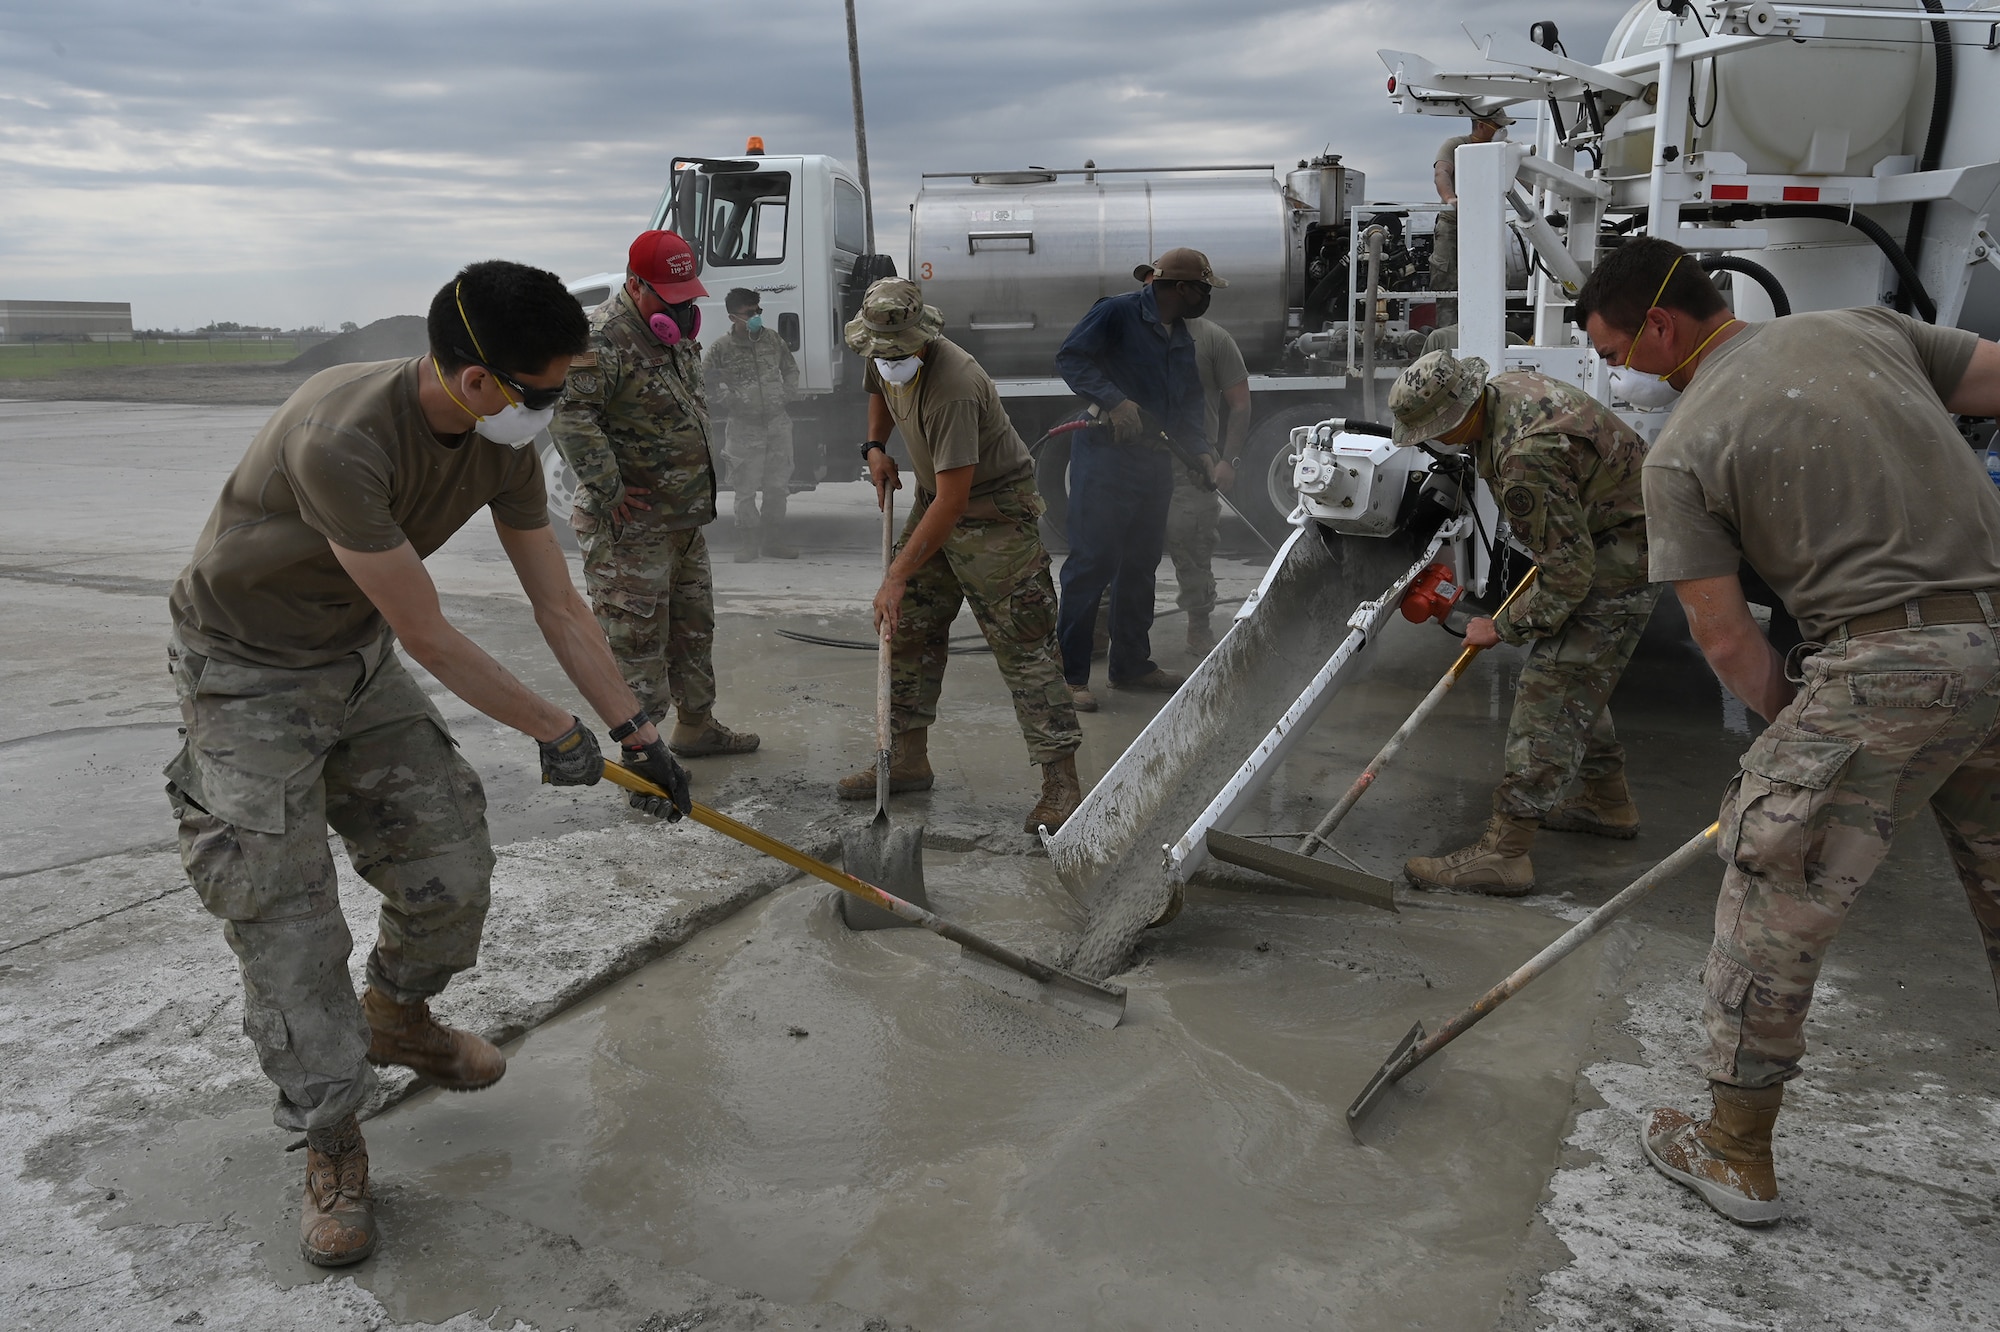 Four military members smooth quick-set concrete with rakes in a square hole in an effort to patch the hole for training at the North Dakota Air National Guard Regional Training Site, Fargo, N.D., Sept. 30, 2021. The concrete patching material is coming down a metal shoot from a machine called a volumetric mixer.